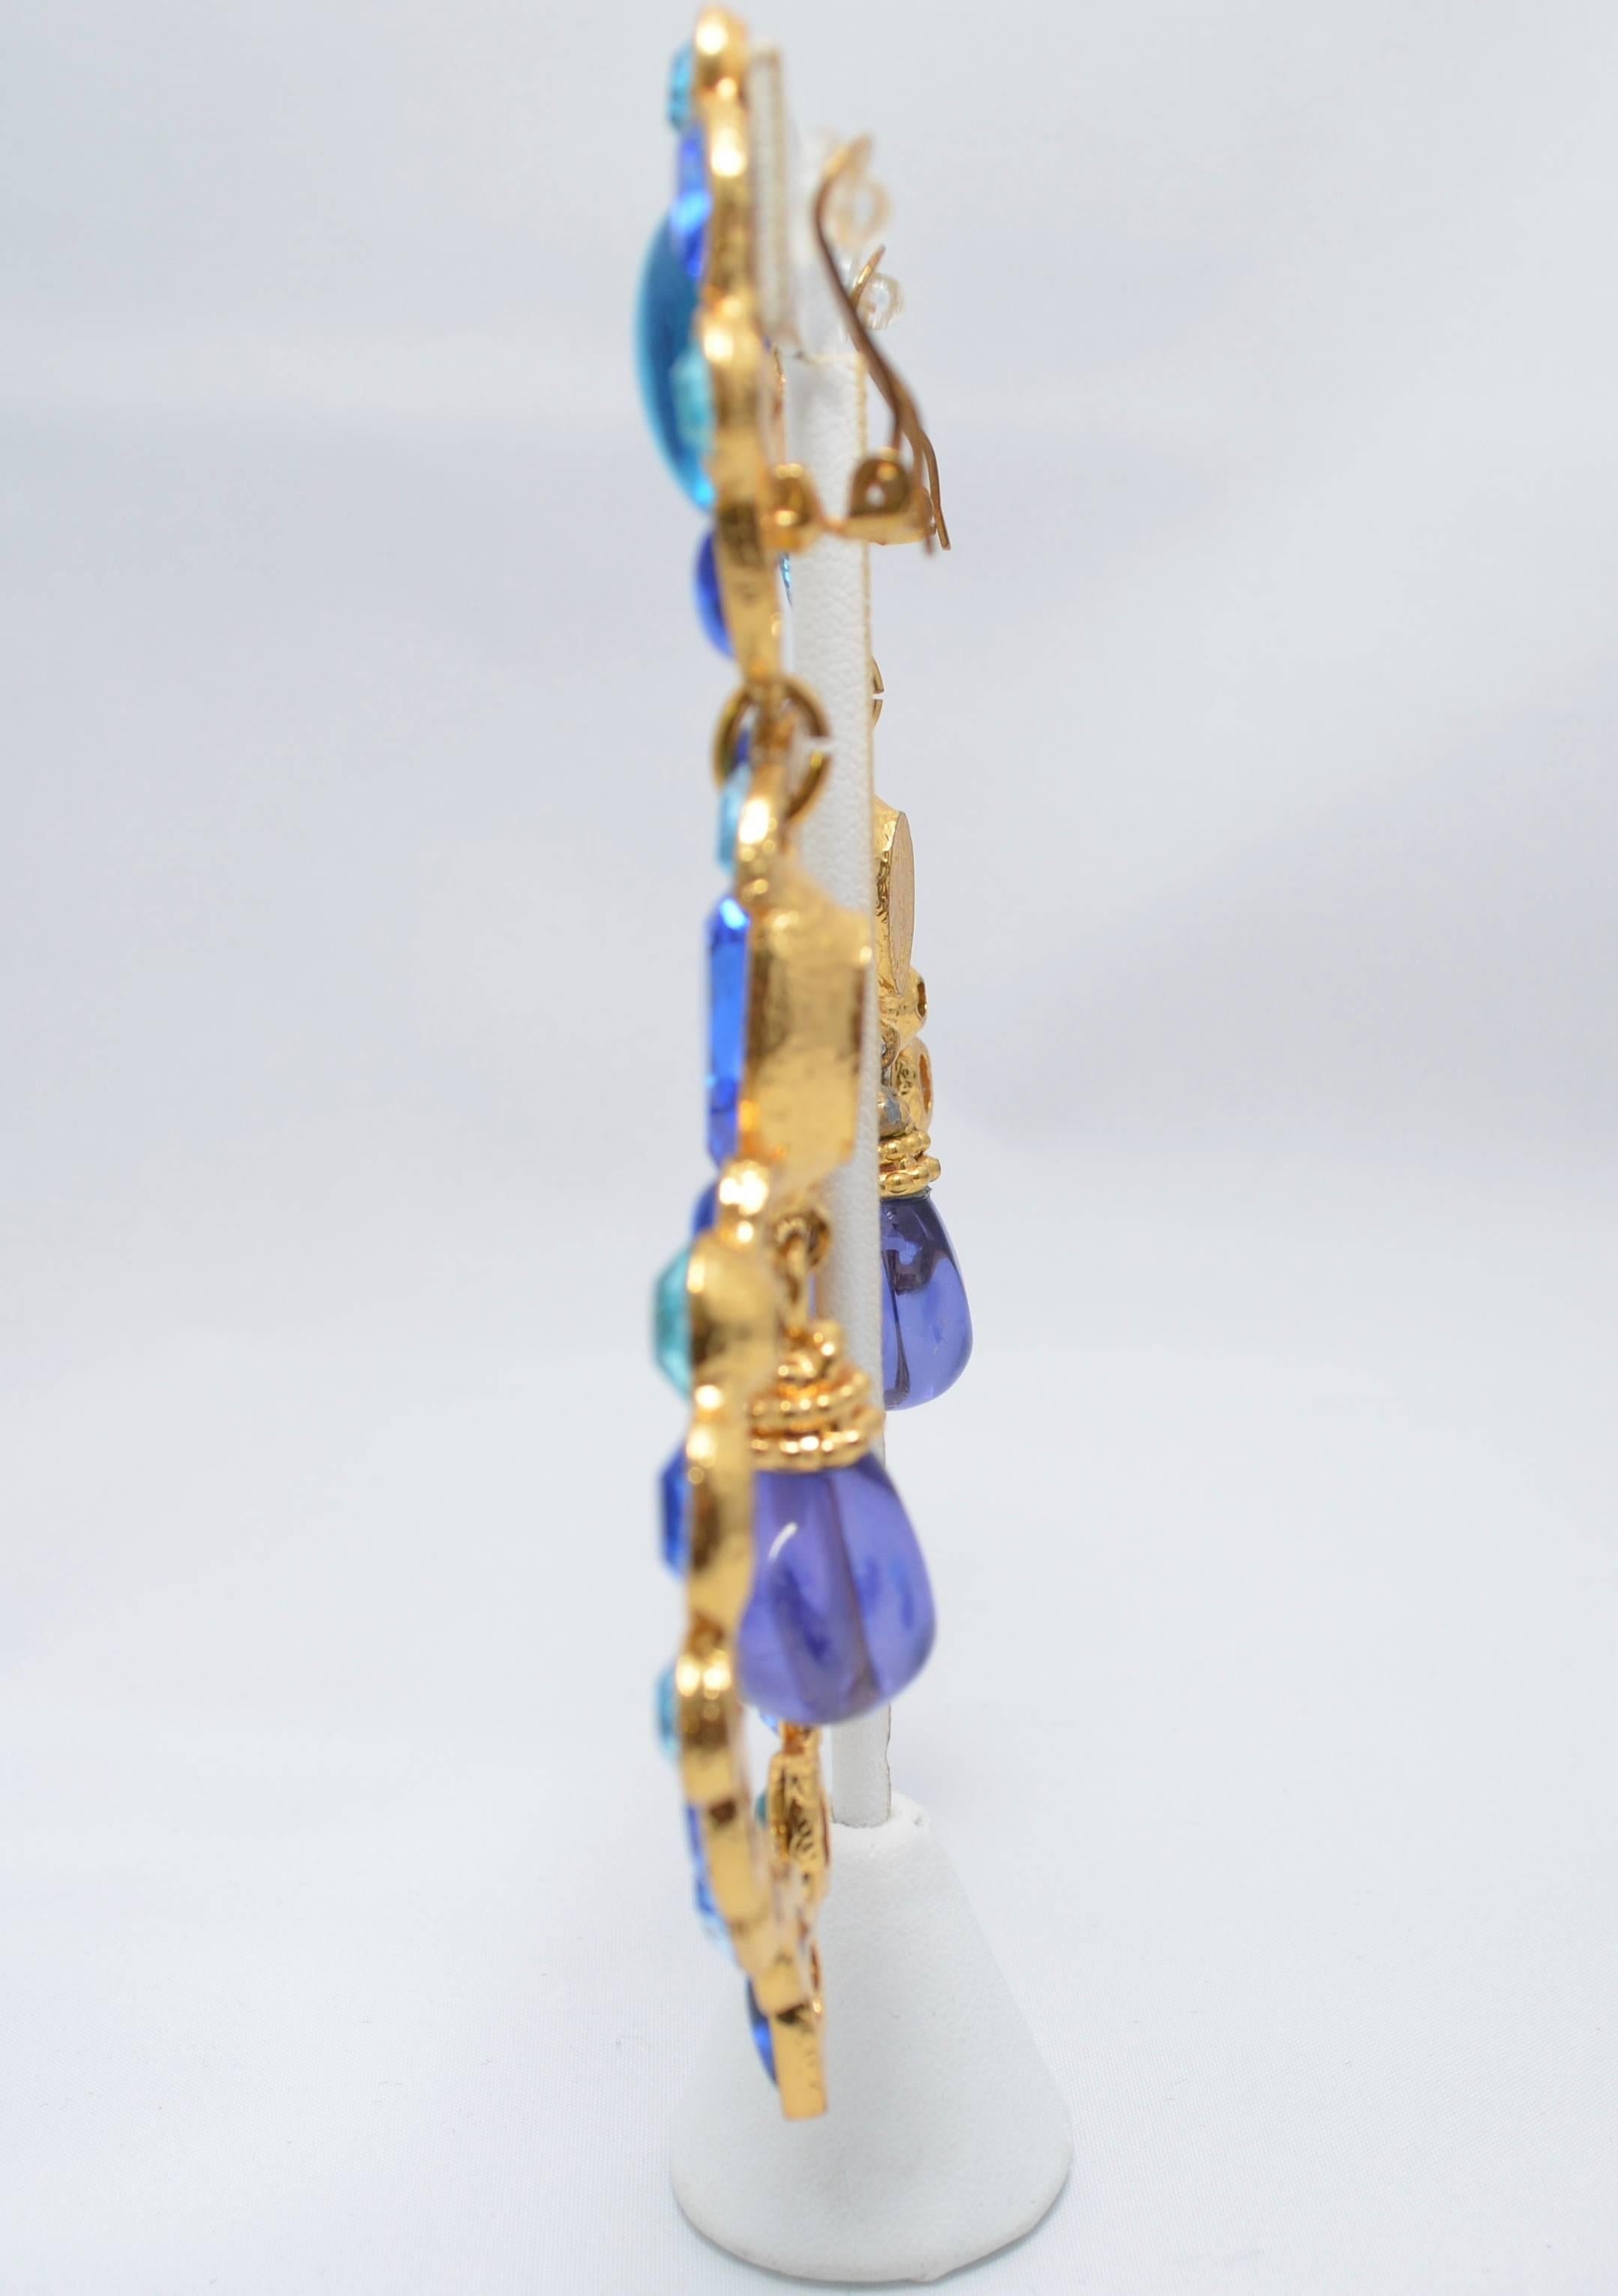 Gorgeous Yves Saint Laurent Runway 1980's massive blue heart shape drop earrings with Gripoix drop, flower top and gold frames. Made in France and marked with the Yves Saint Laurent Rive Gauche stamp. Gorgeous!